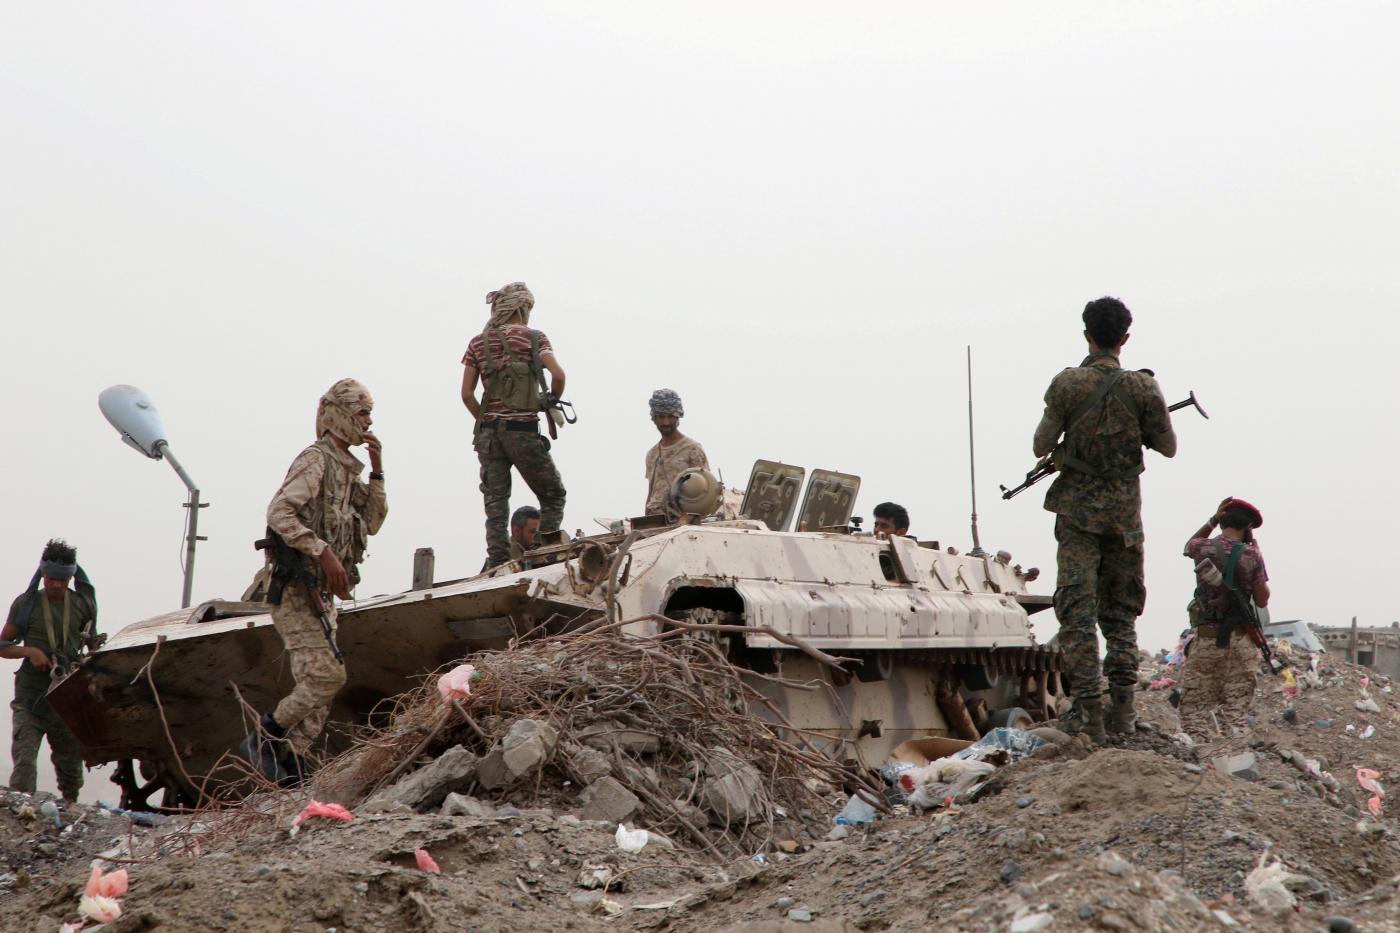 Members of UAE-backed southern Yemeni separatist forces stand by a military vehicle.